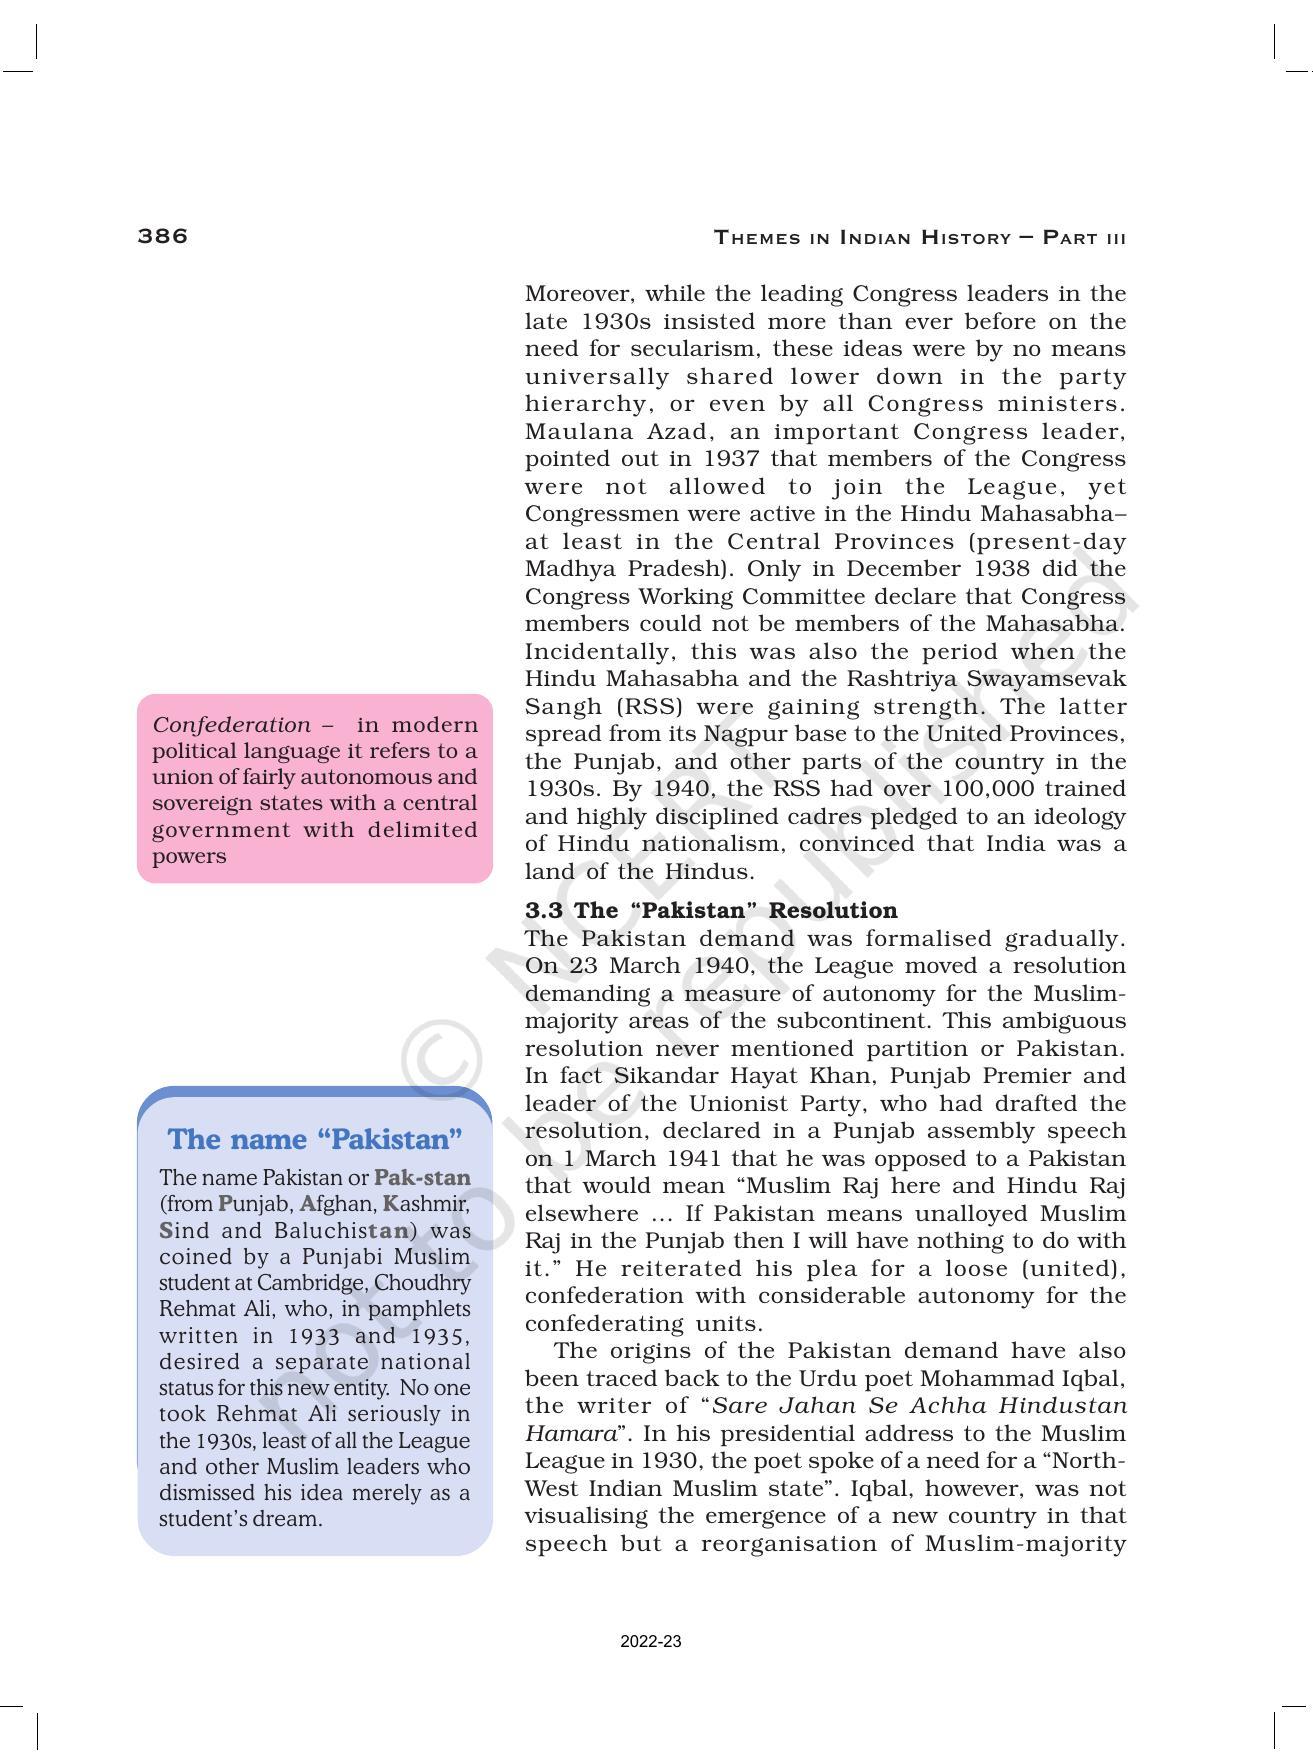 NCERT Book for Class 12 History (Part-III) Chapter 14 Understanding Partition - Page 11